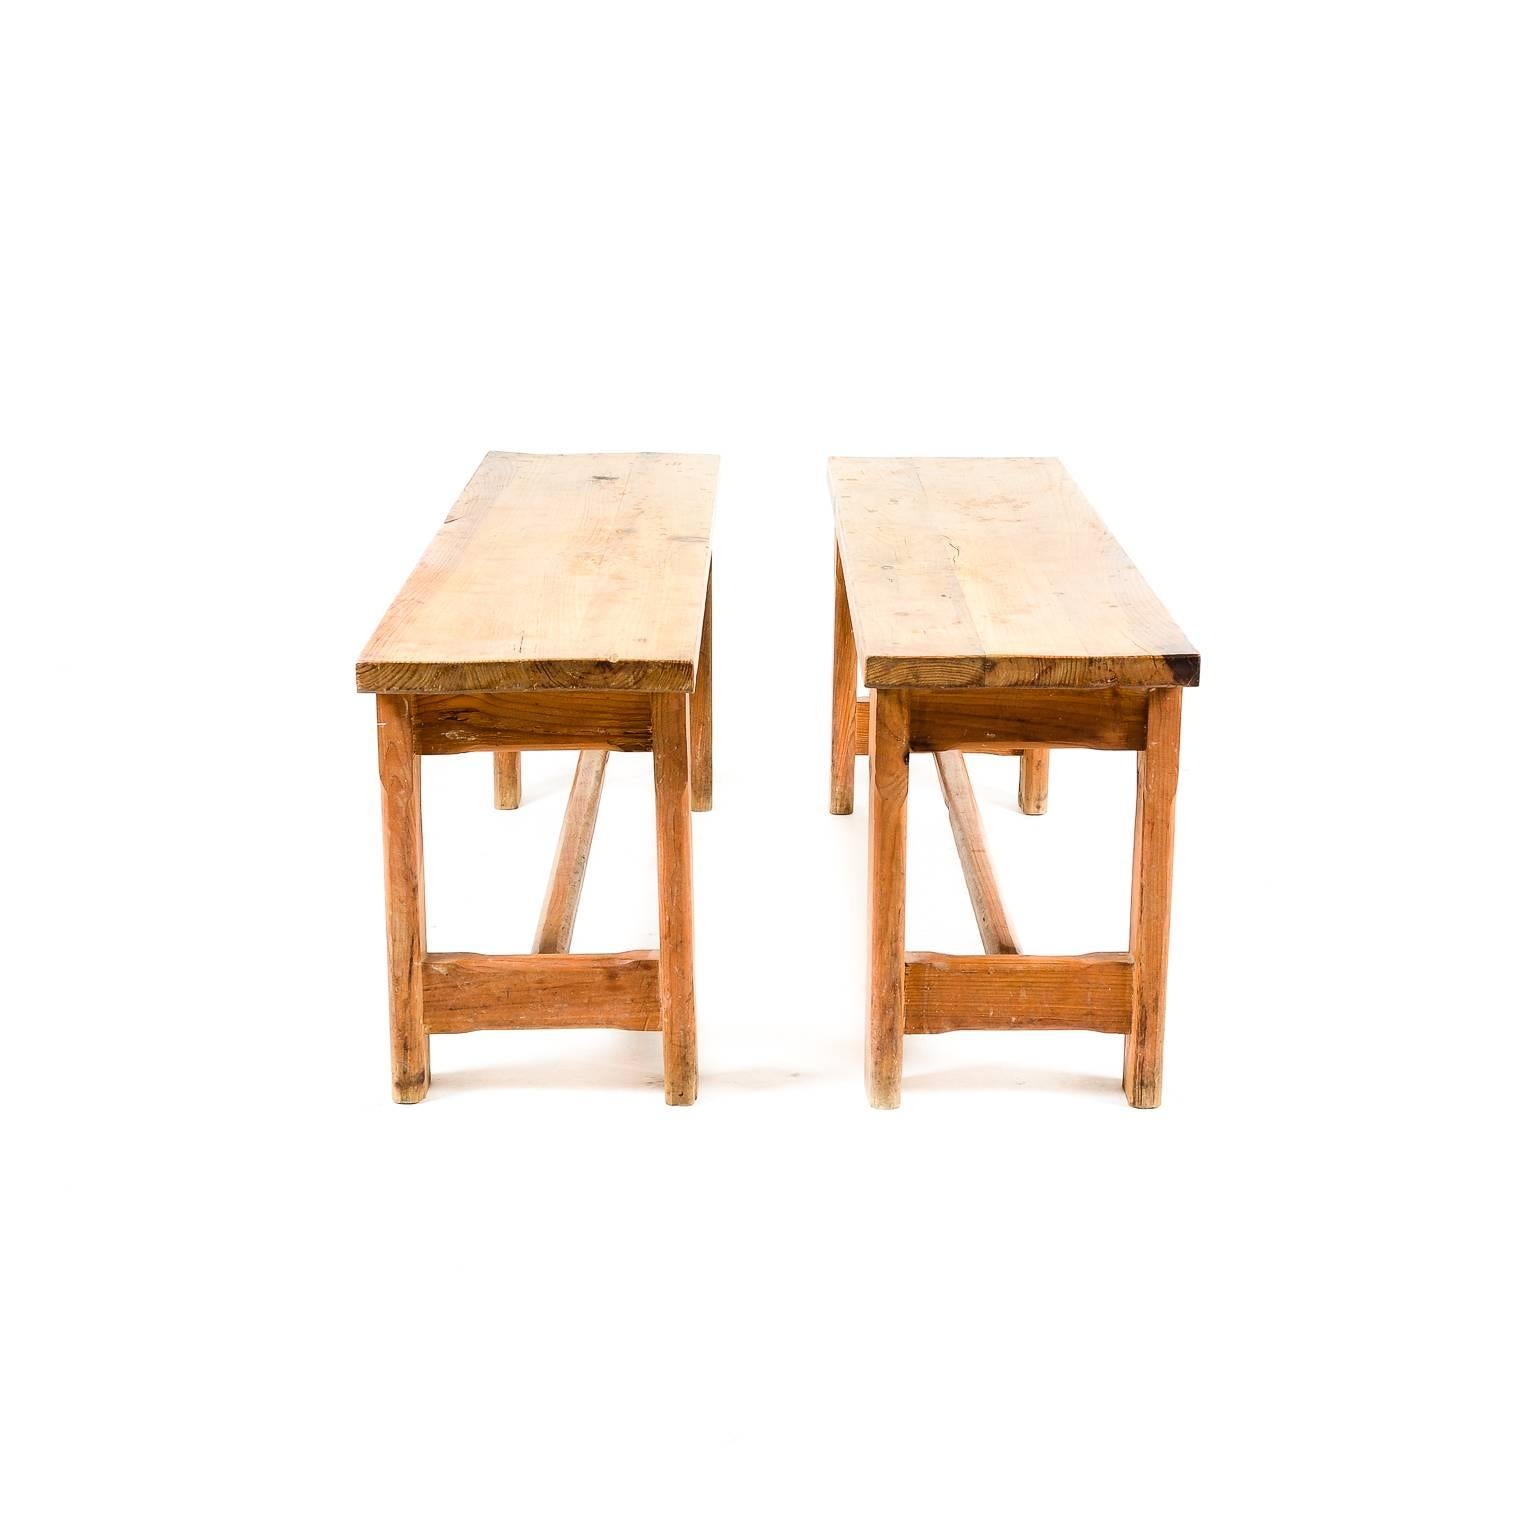 Antique early 20th Century pair of French solid pine benches. Sturdy and suitable for everyday use.





